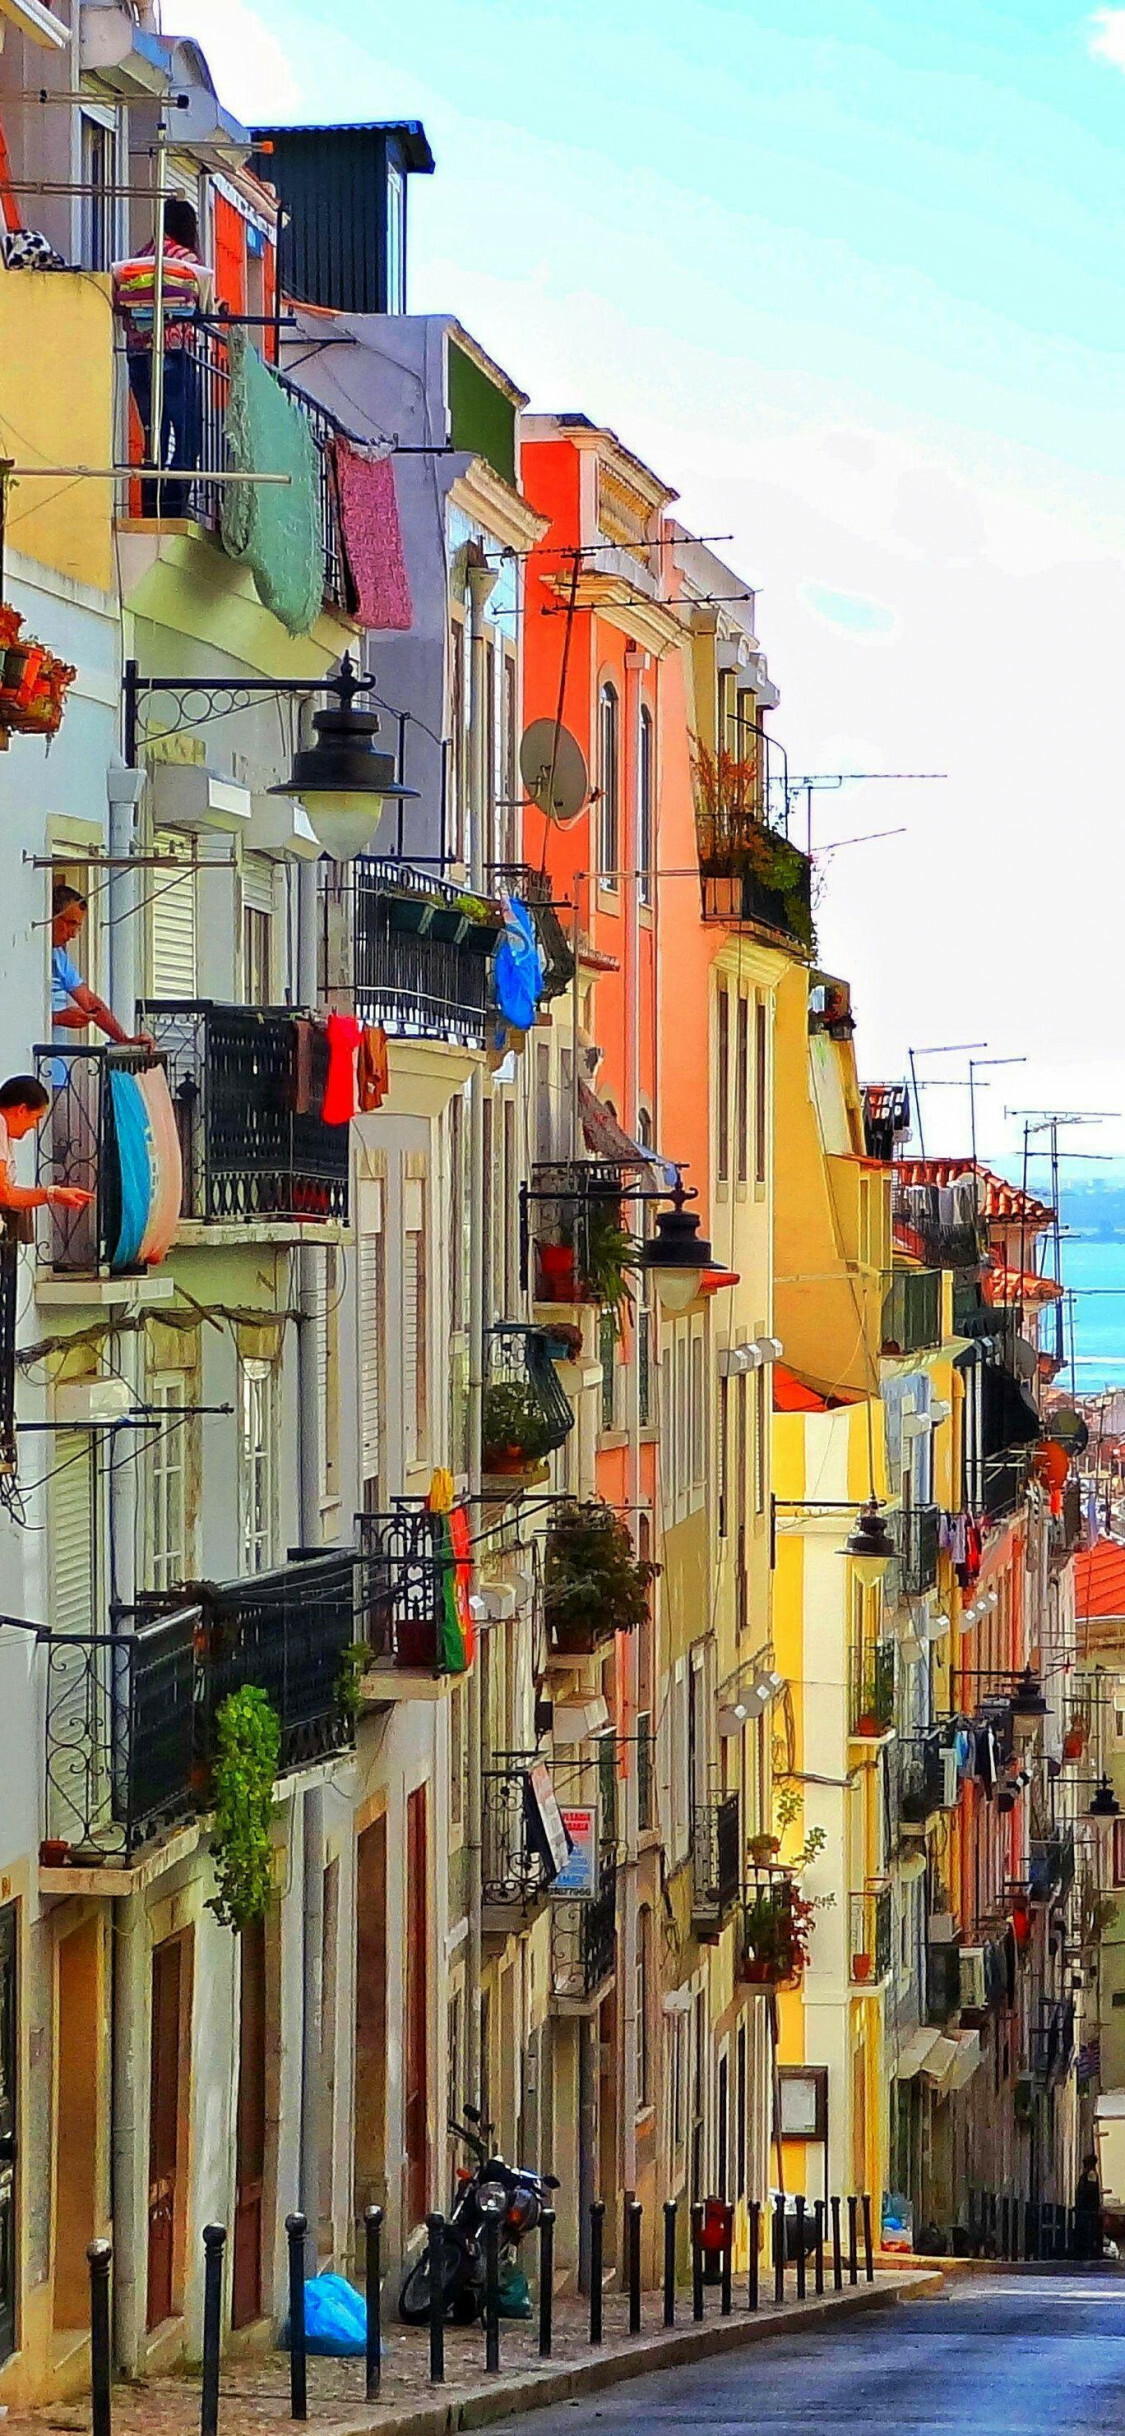 Portugal: Lisbon, The westernmost country of the European mainland, Streetscape. 1130x2440 HD Background.